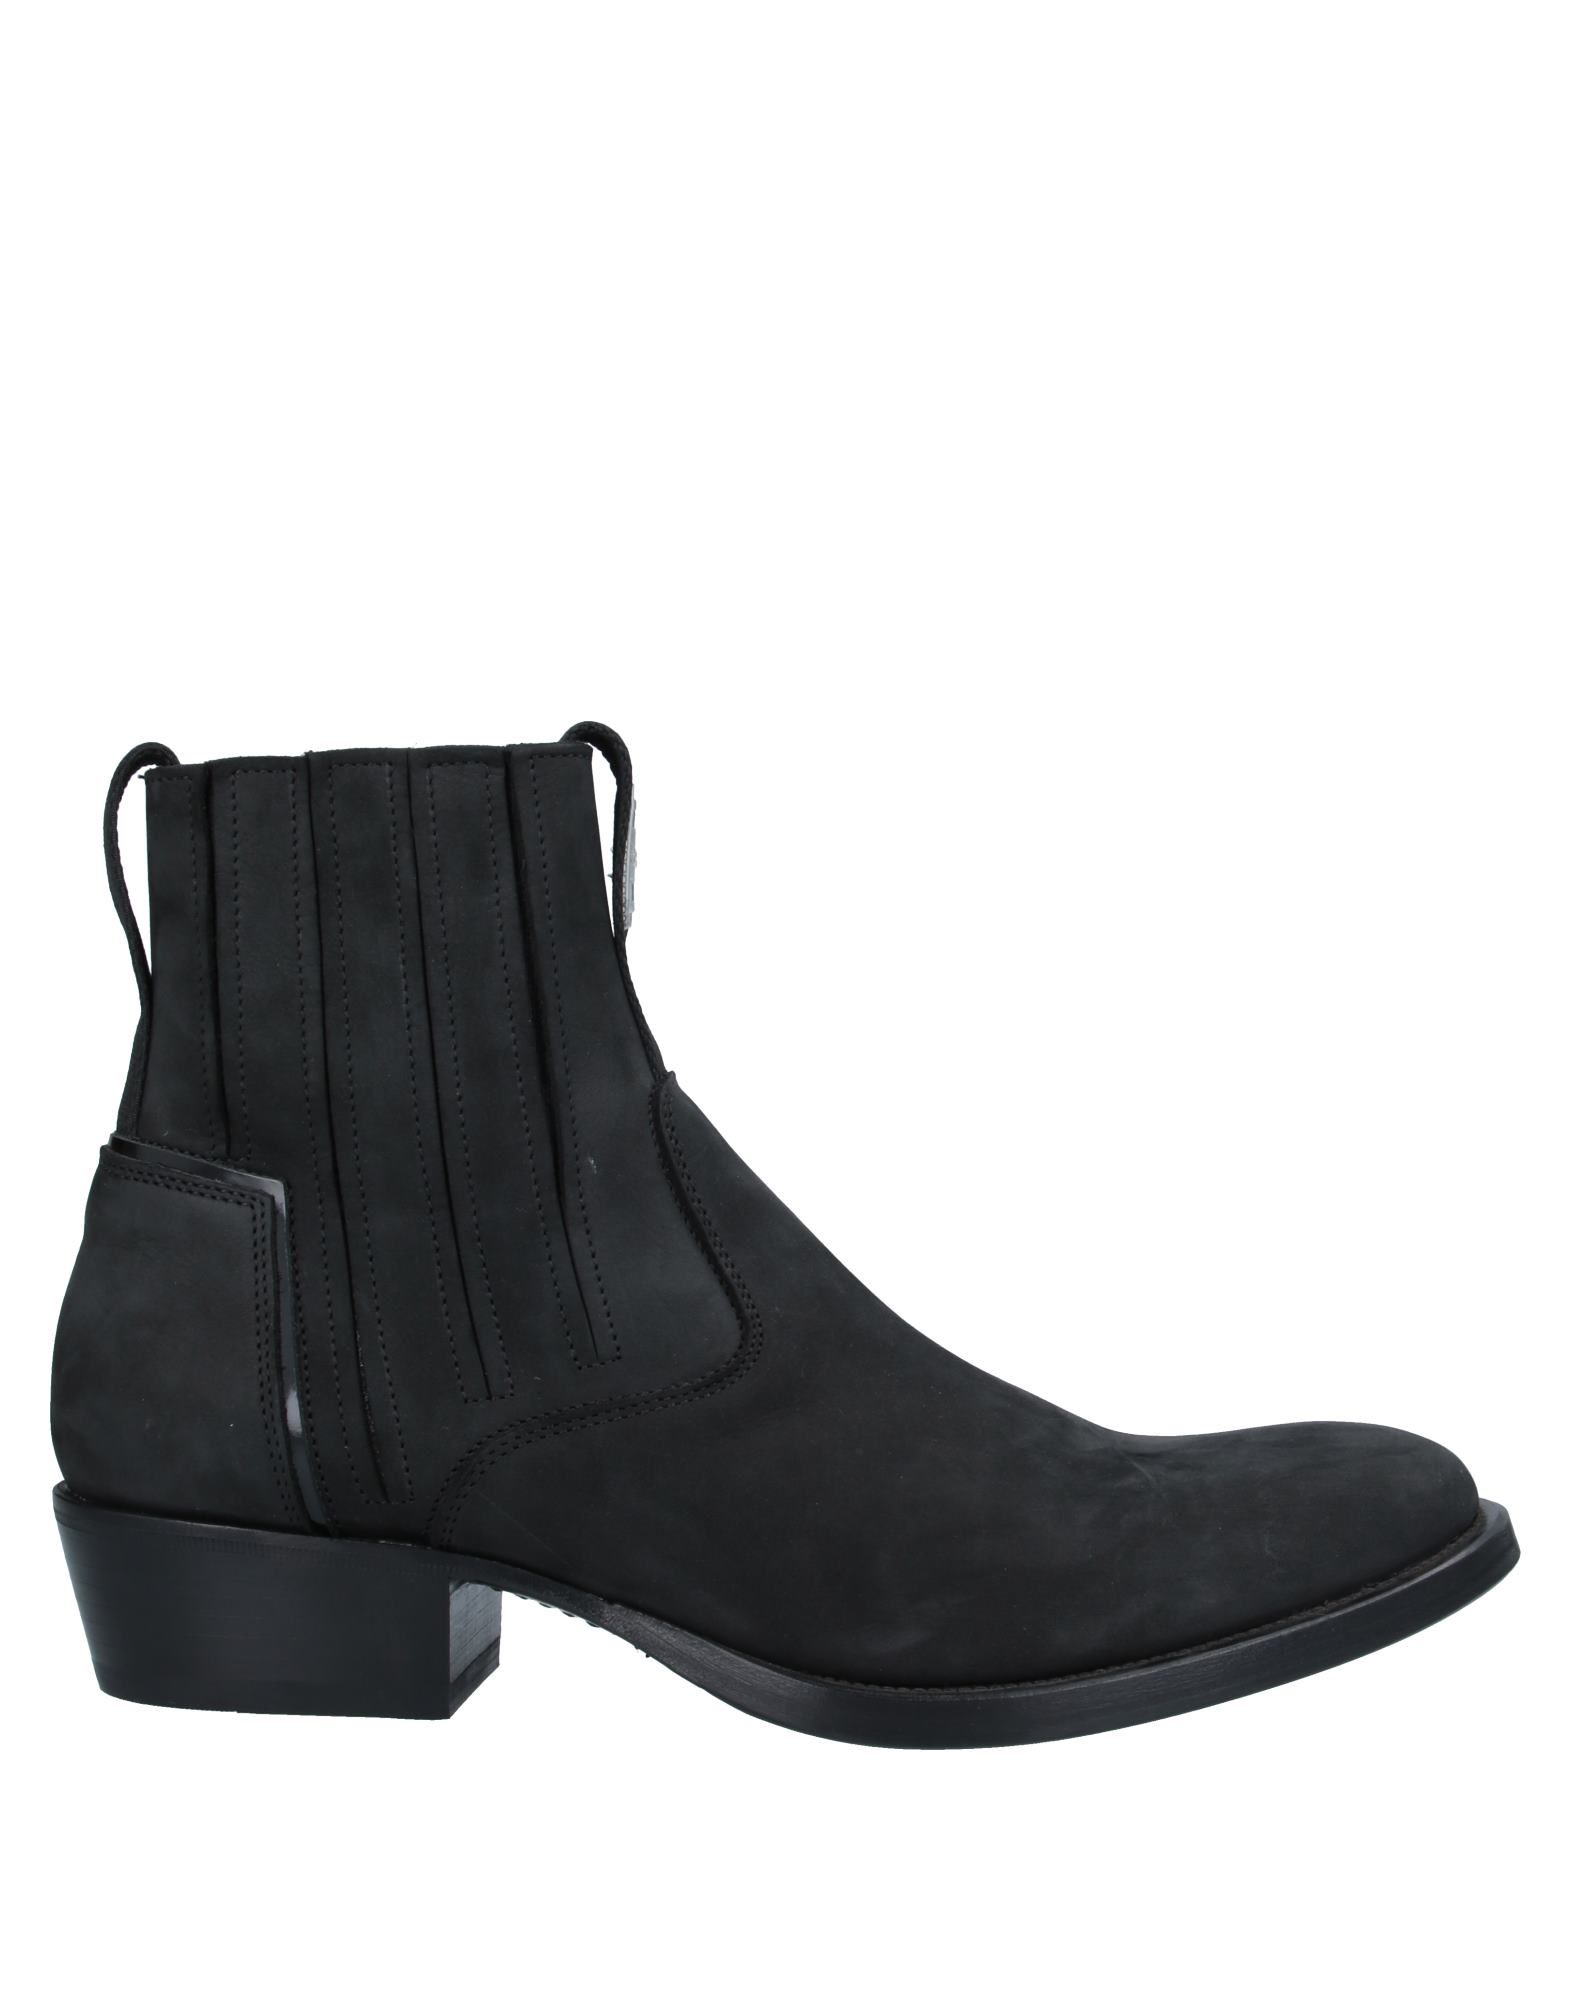 bruno bordese ankle boots